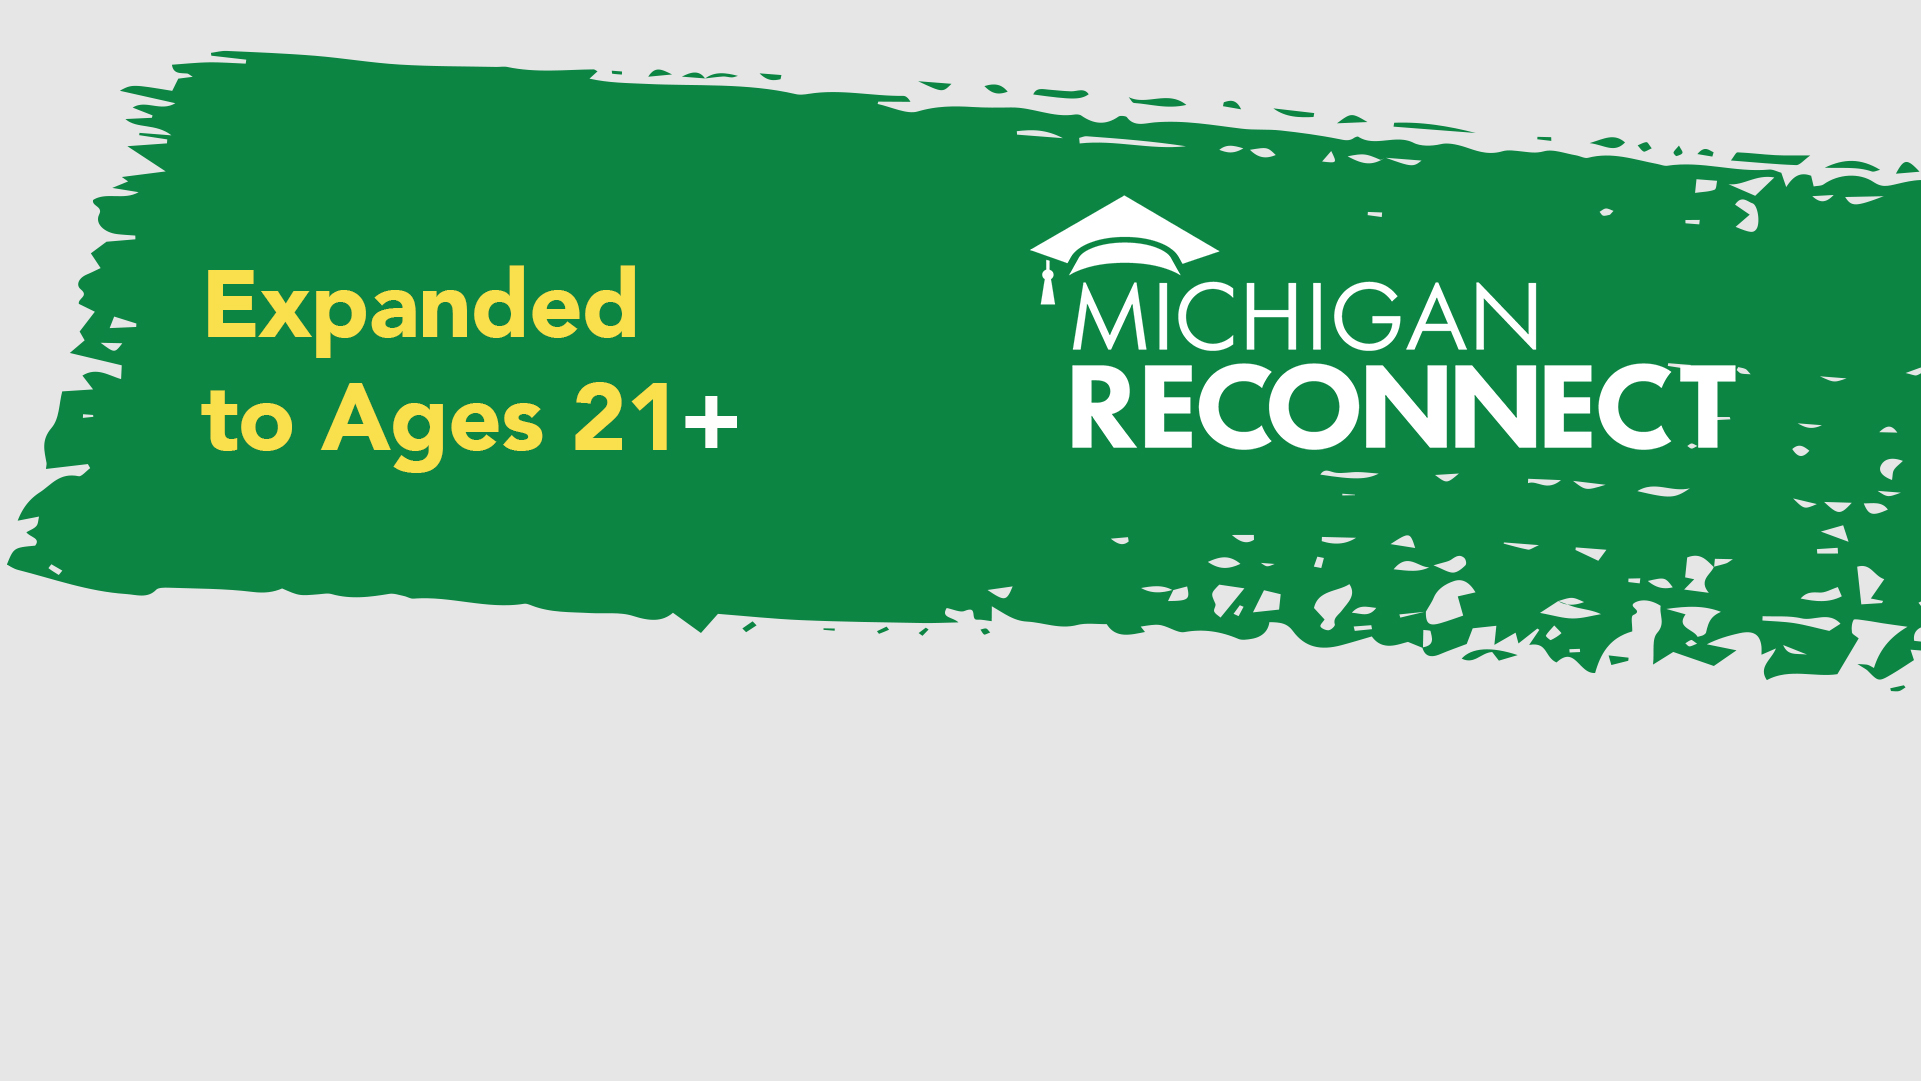 Michigan Reconnect Expanded Age